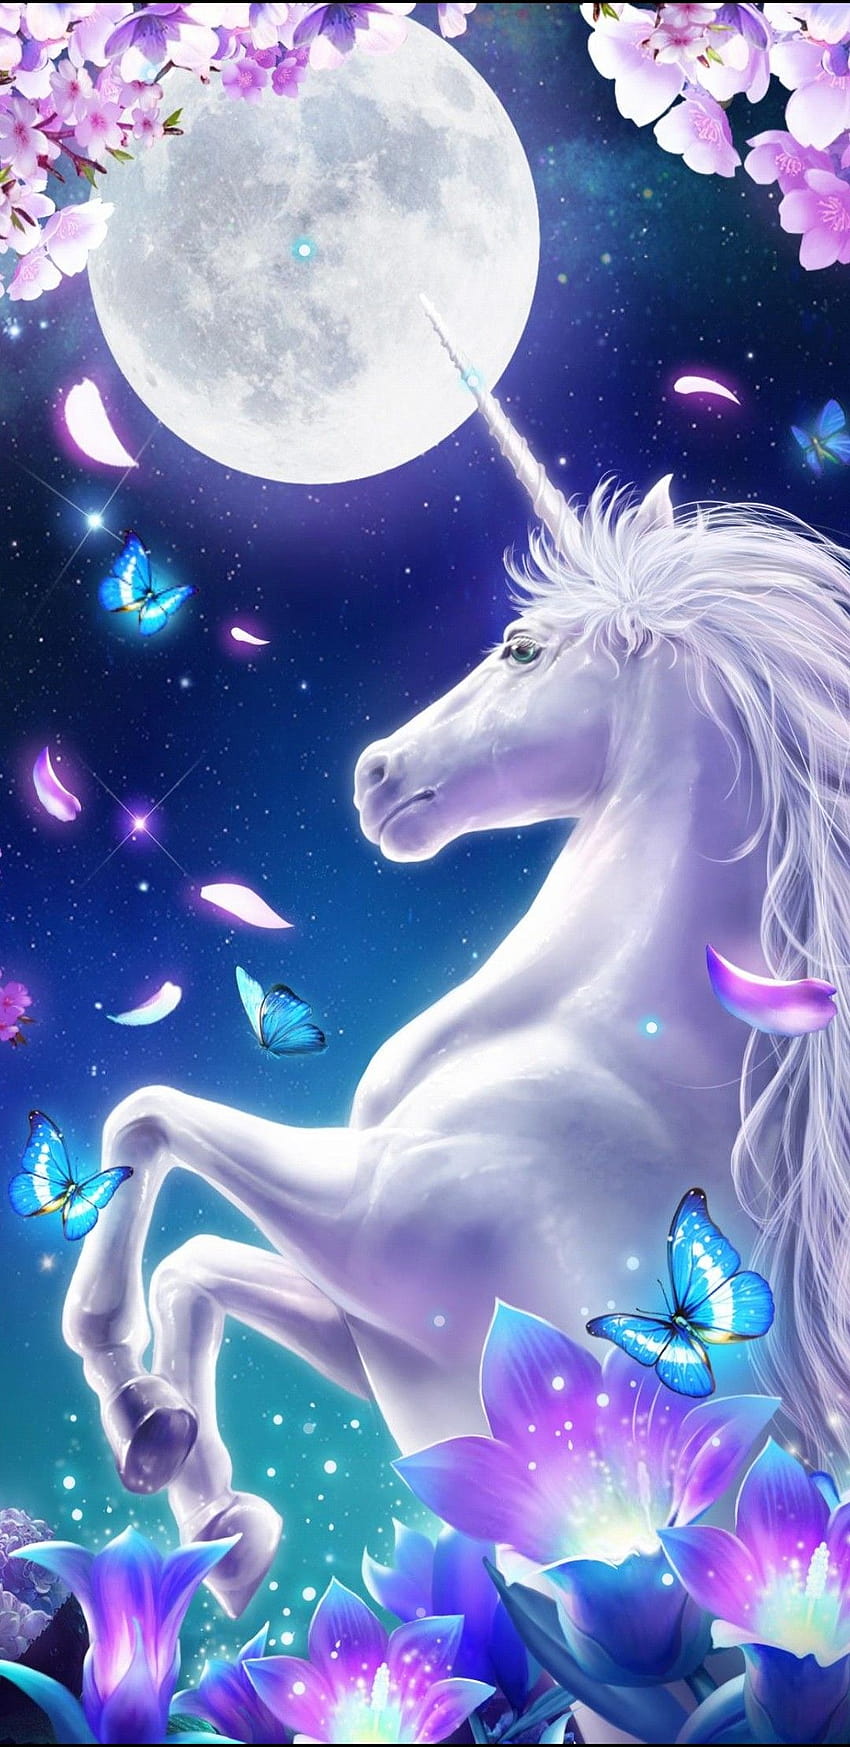 Download Unicorn Wallpaper by angginilenes  eb  Free on ZEDGE now  Browse millions of popula  Unicorn wallpaper cute Unicorn wallpaper  Pink unicorn wallpaper